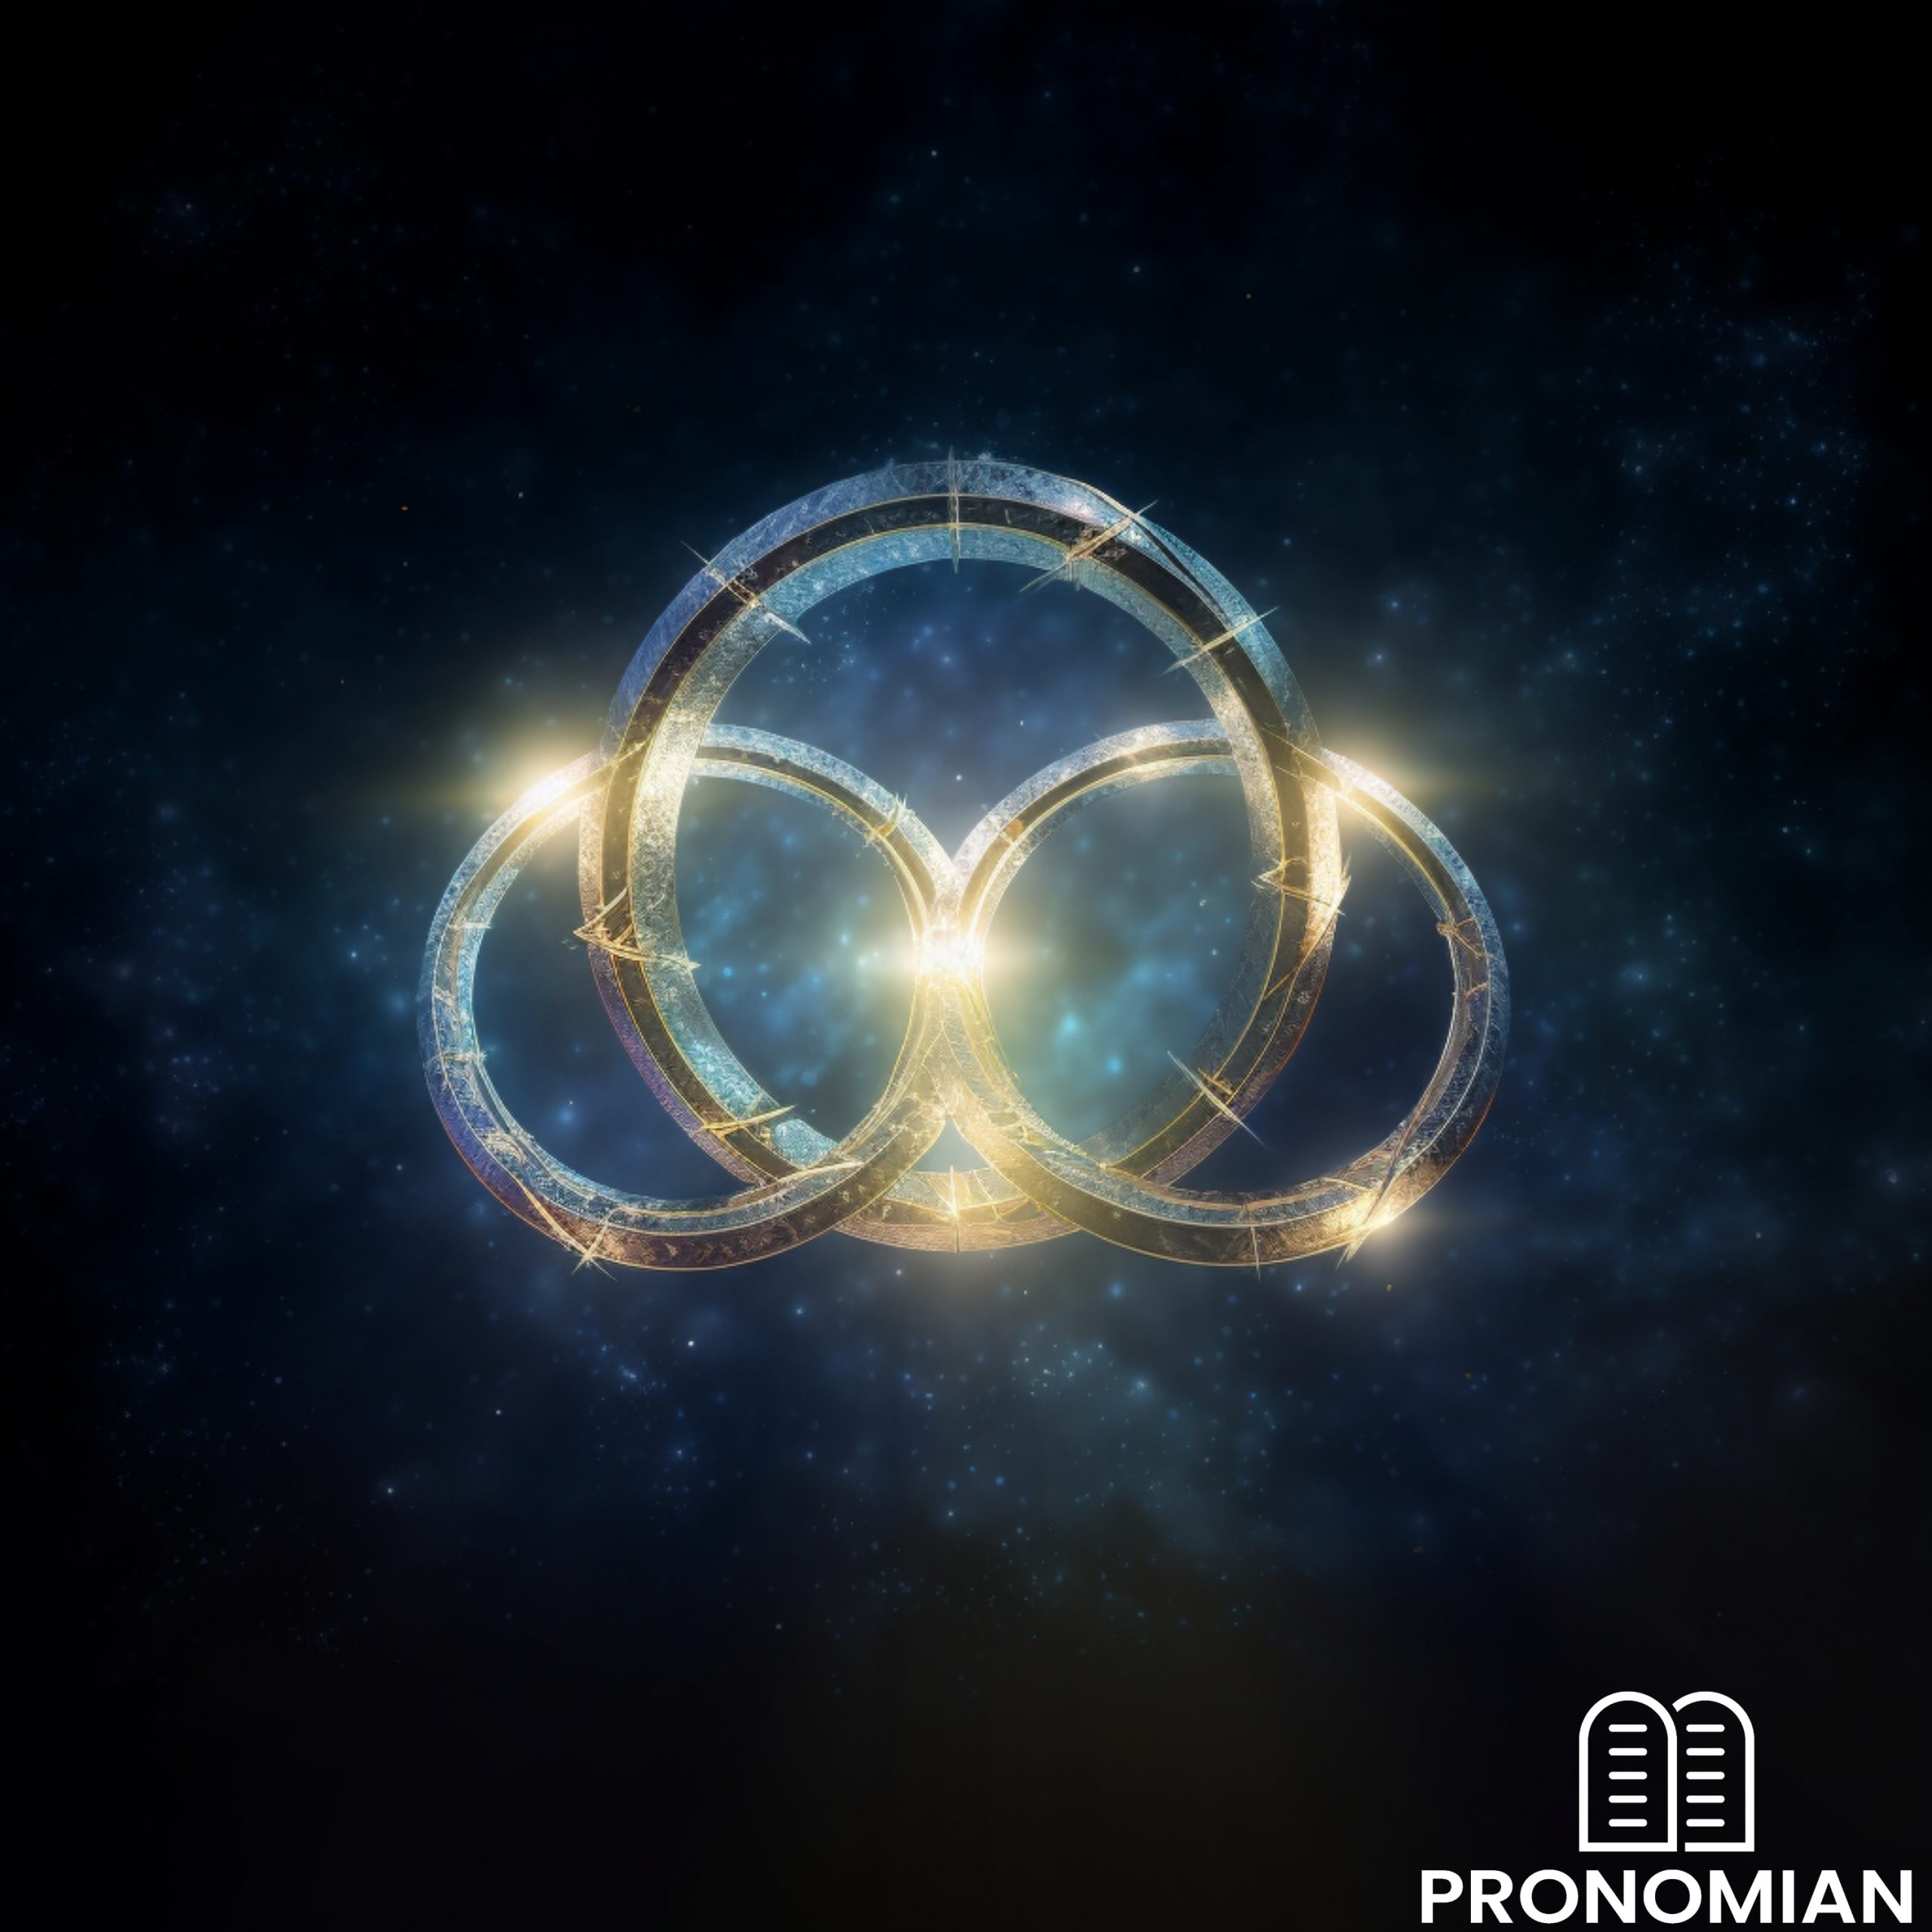 an image of three interconnected rings against a celestial background. Each ring is labeled respectively as Father, Son, and Holy Spirit. The overlapping center area illuminates a gentle glow, symbolizing the unity within the Trinity.